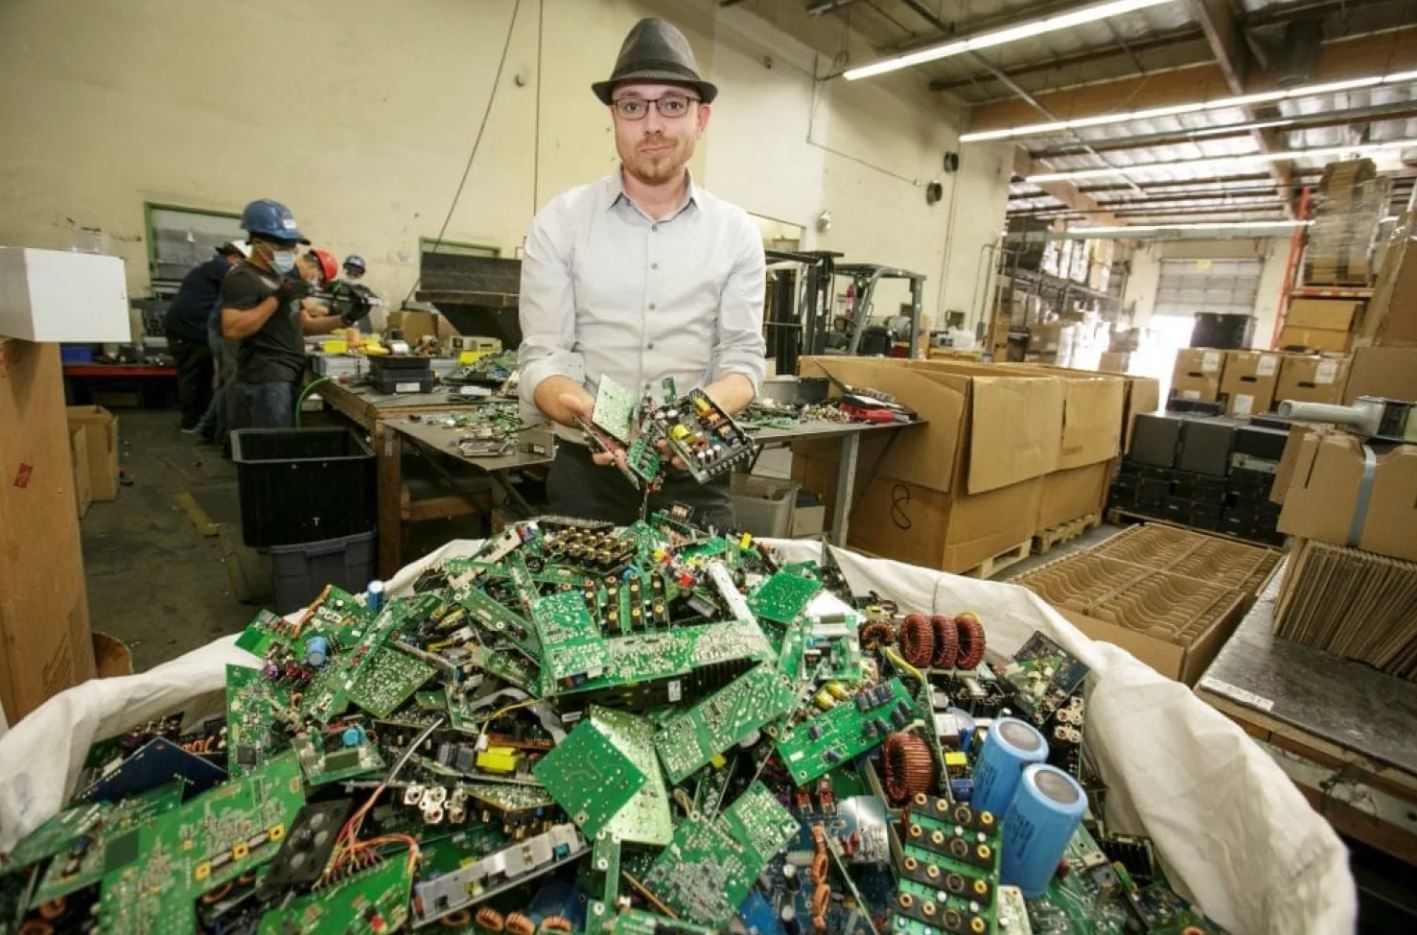 Man tries to reduce e-waste but is facing prison time over dispute with Microsoft